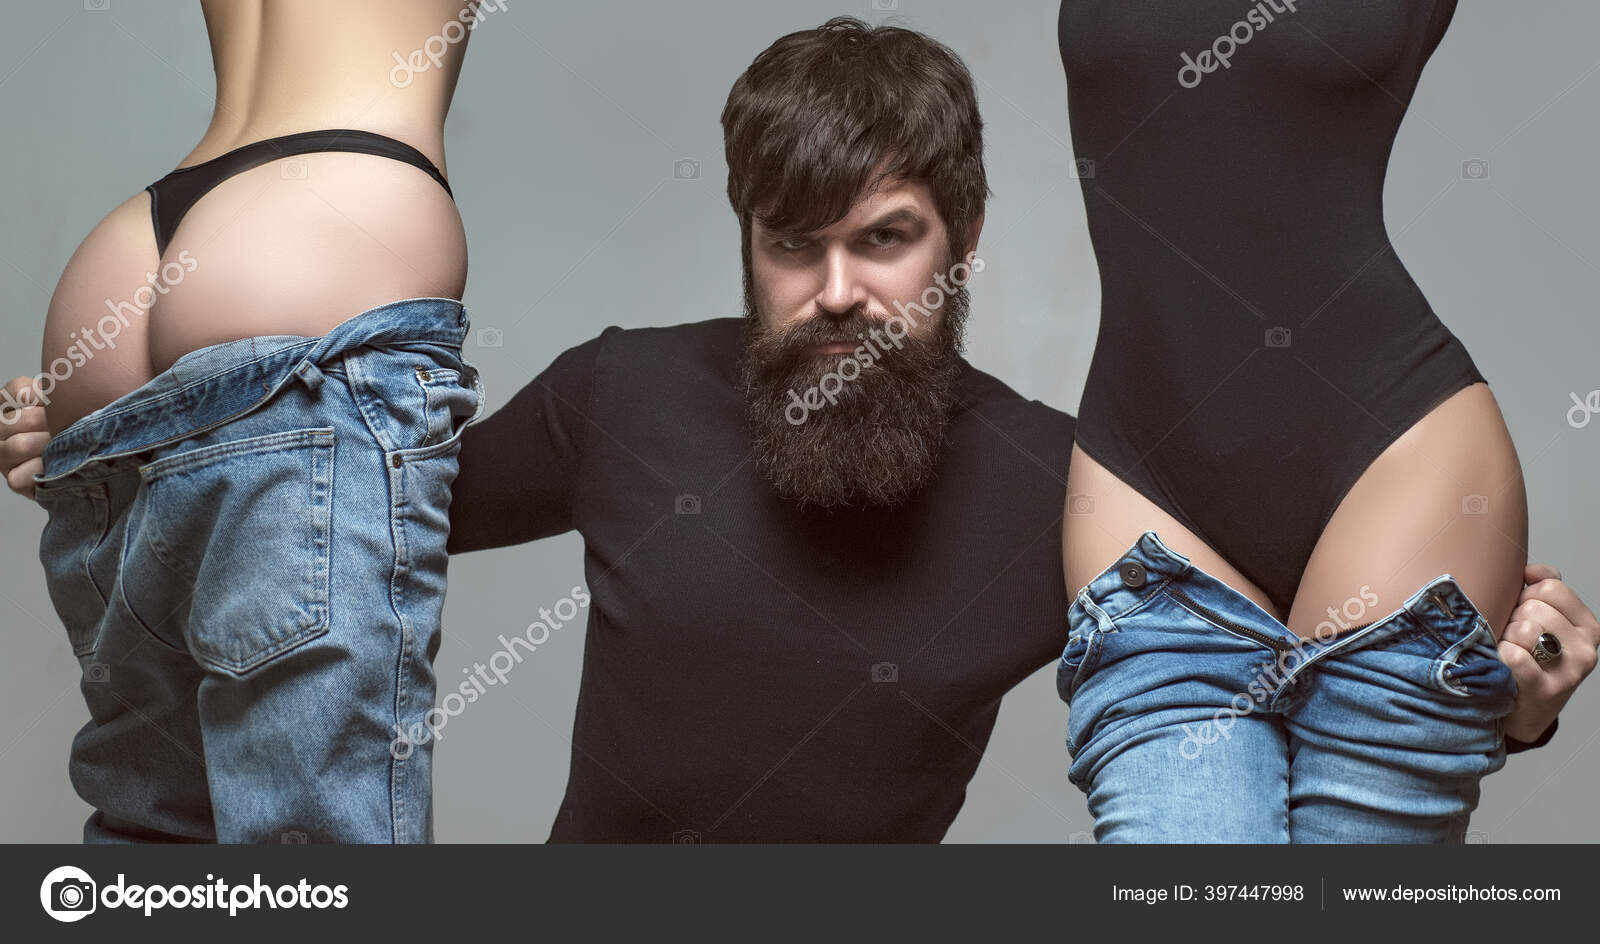 Bearded man and two sexy women. Polygamy or bigamy. Swinger, orgy or trio having sex. Bisexual lady. Prostitution or fantasy image